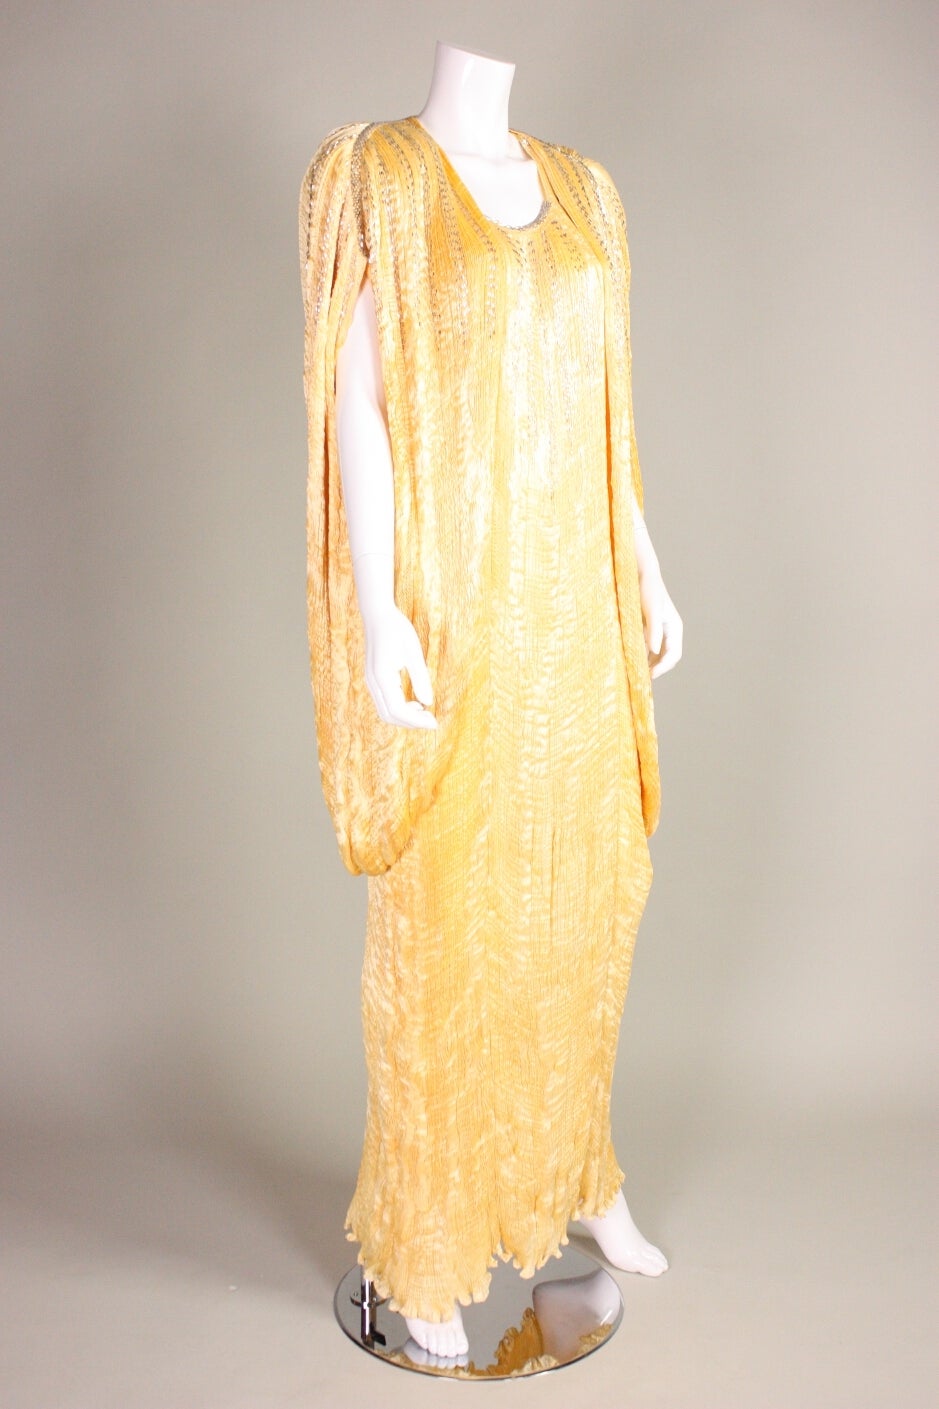 Vintage dress and coat ensemble from Patricia Lester is made of buttery yellow pleated silk with silver bugle bead adornment.  Sleeveless dress has scoop front and back neck.  Cocoon coat has large shoulder pads and no closures.  Both pieces are